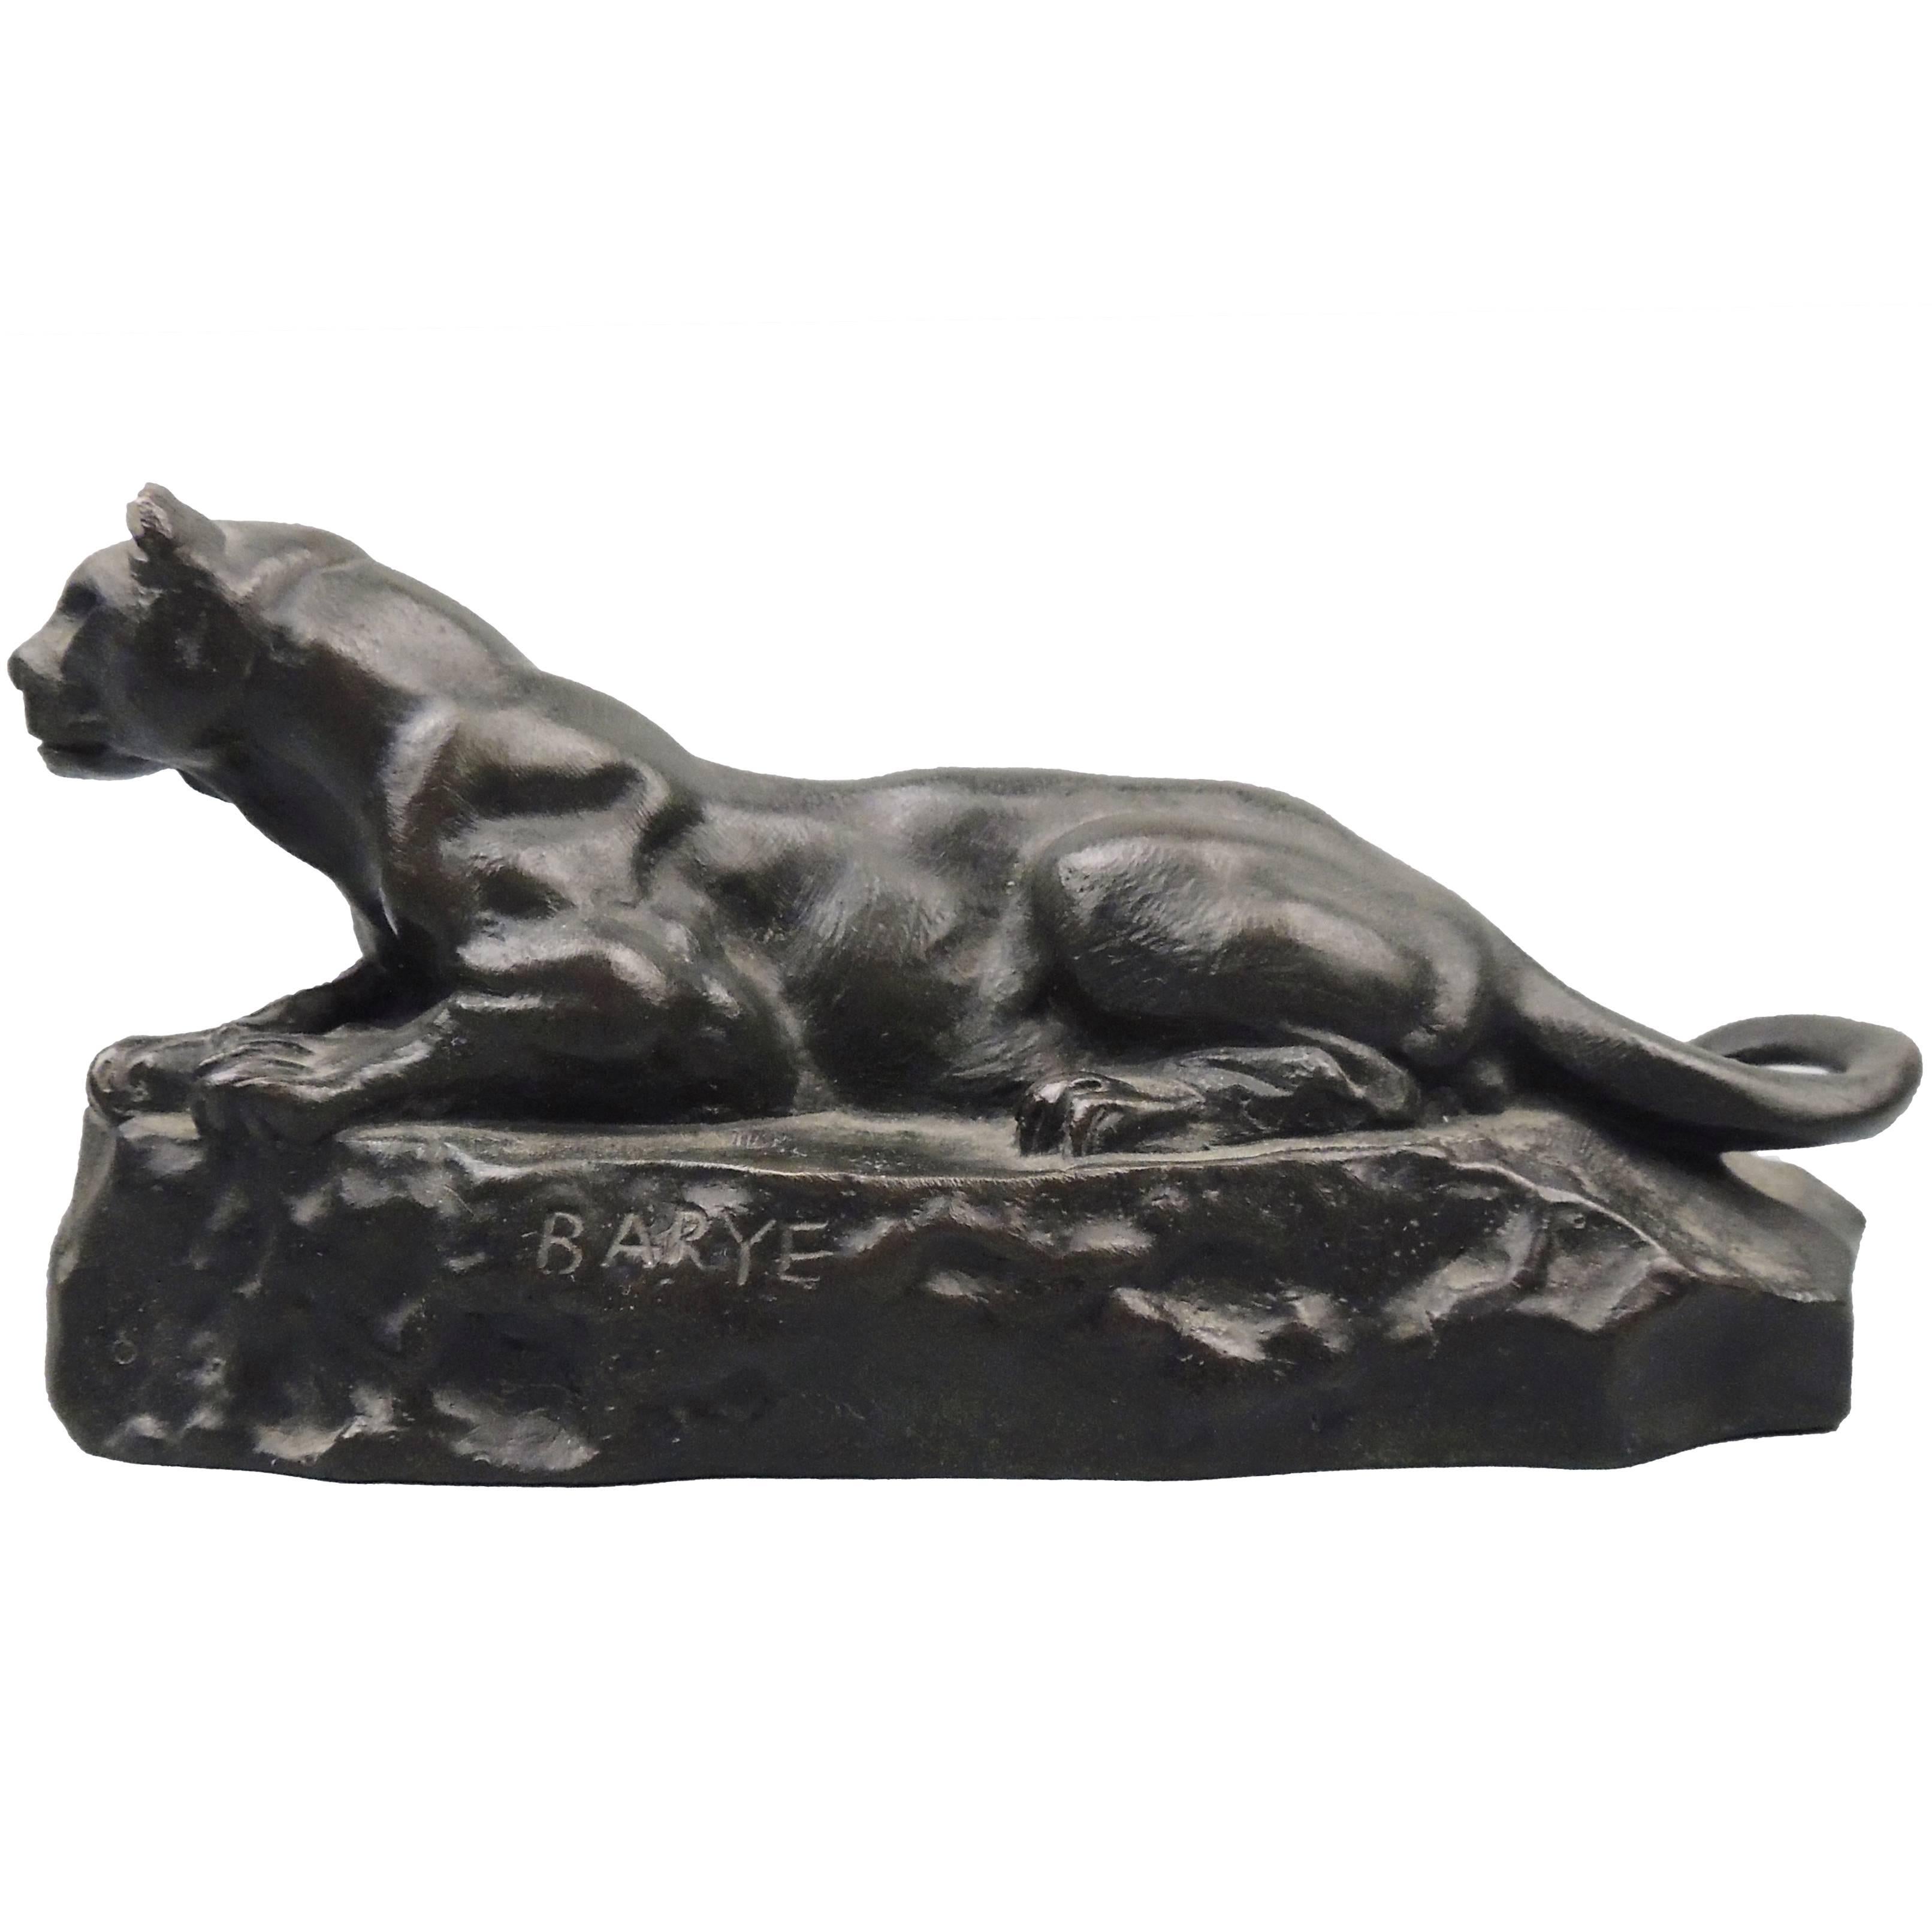 "Panther of Tunis" Bronze Sculpture After Antoine-Louis Barye